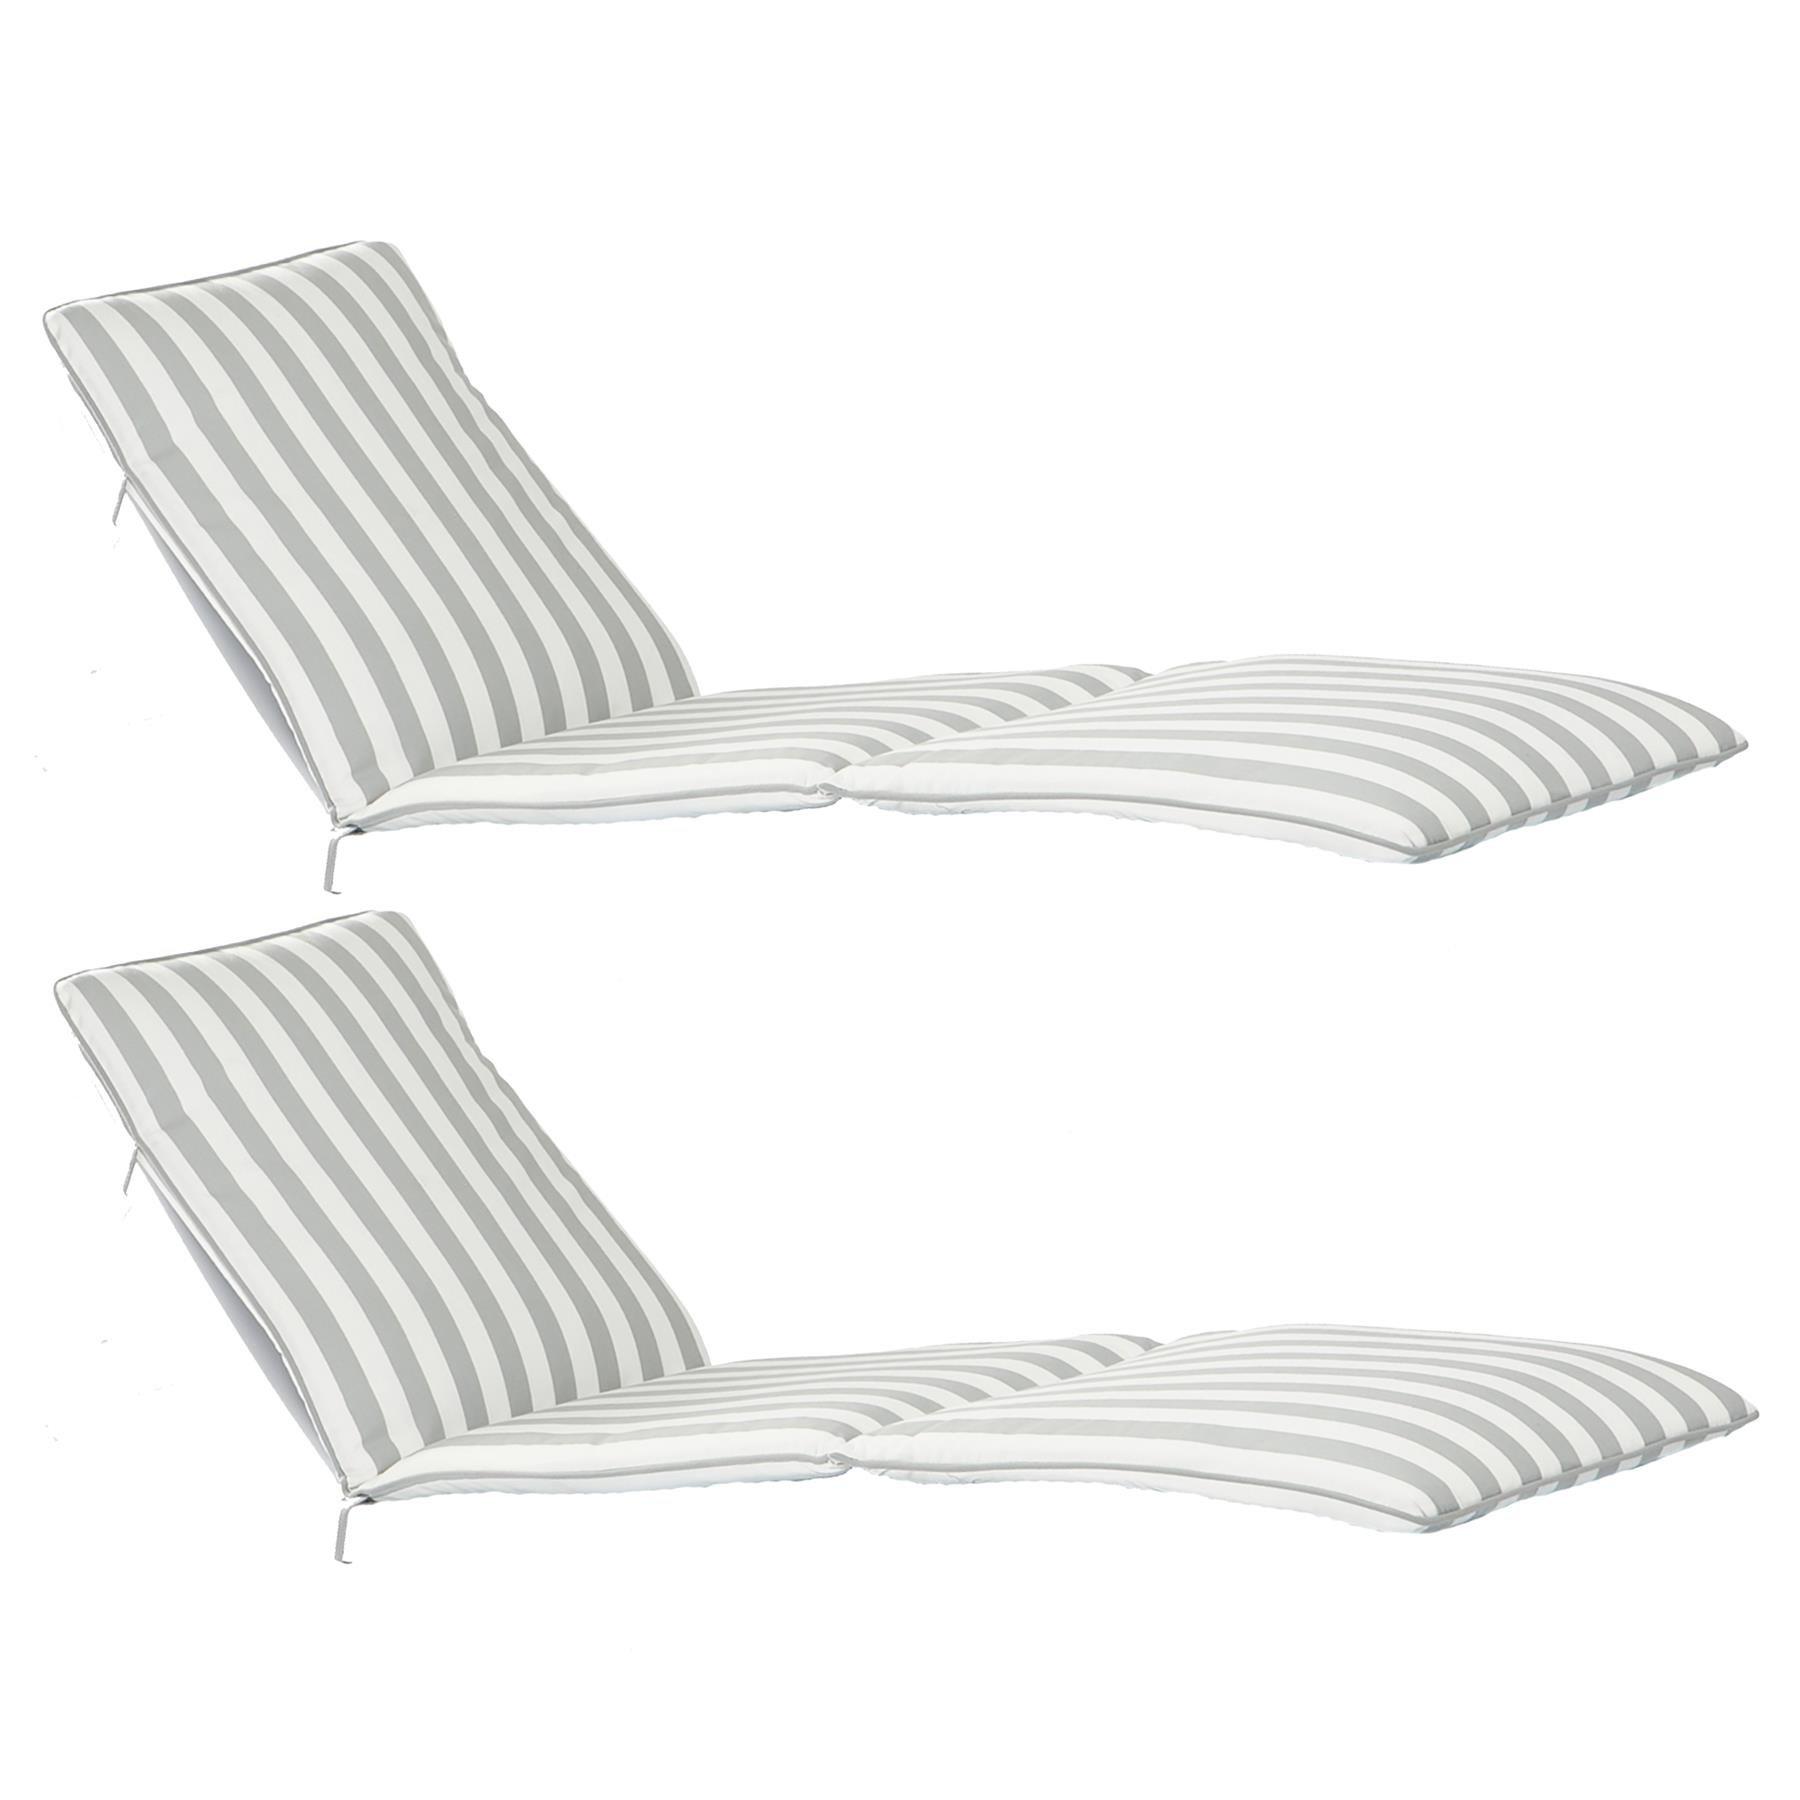 Master Sun Lounger Cushions Grey Stripe Pack of 2